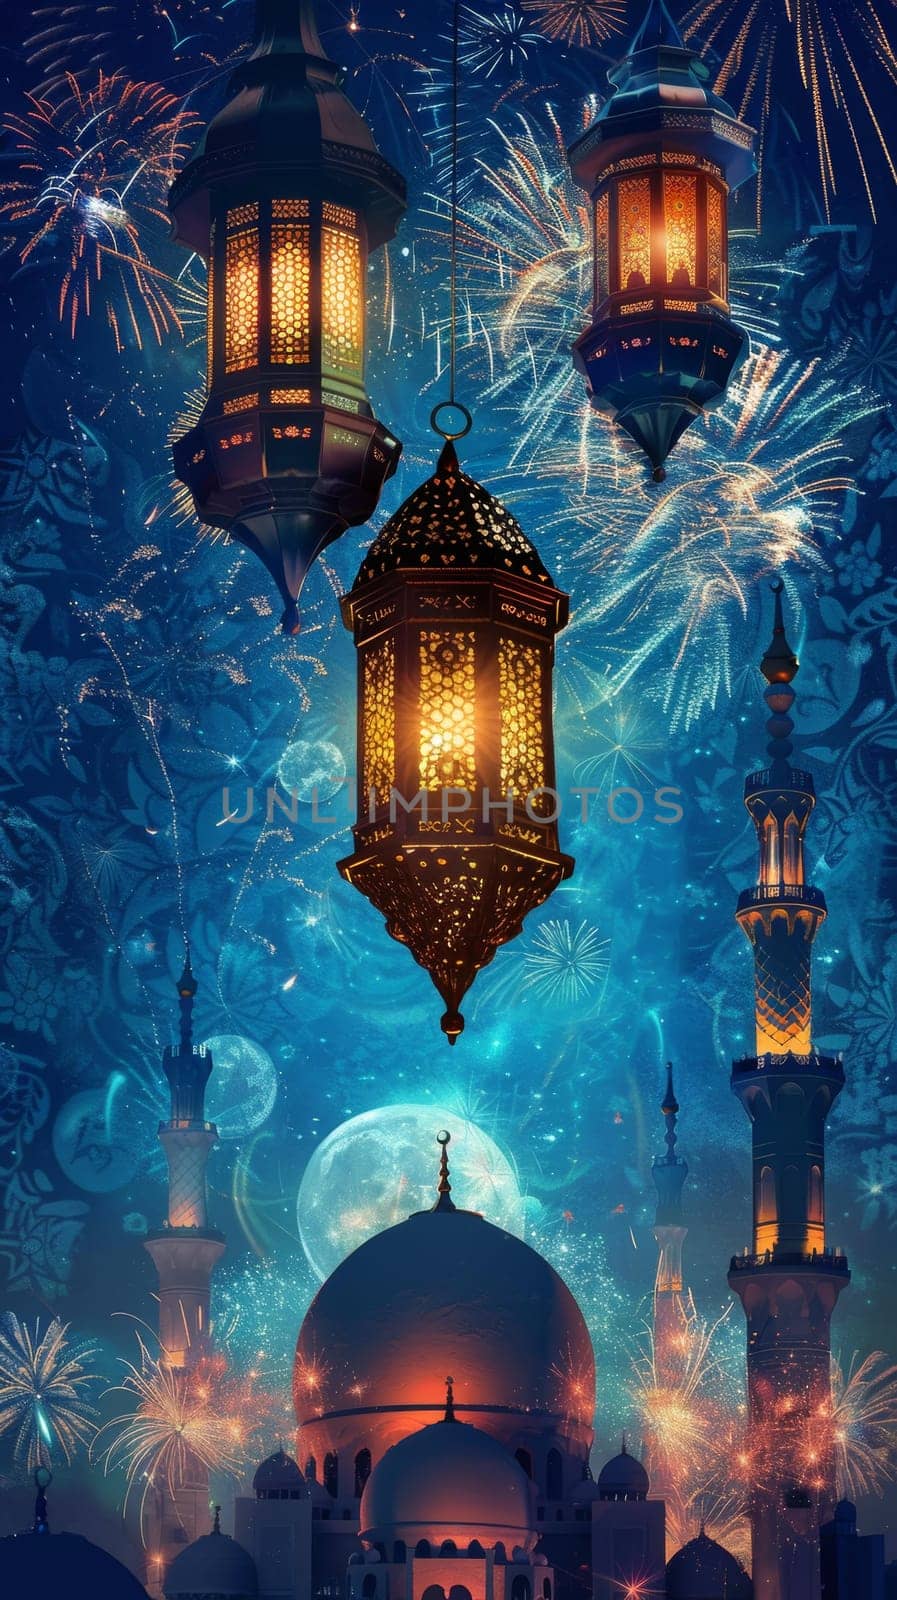 A trio of glowing lanterns adorns a night sky filled with fireworks above an Islamic cityscape with a moonlit dome